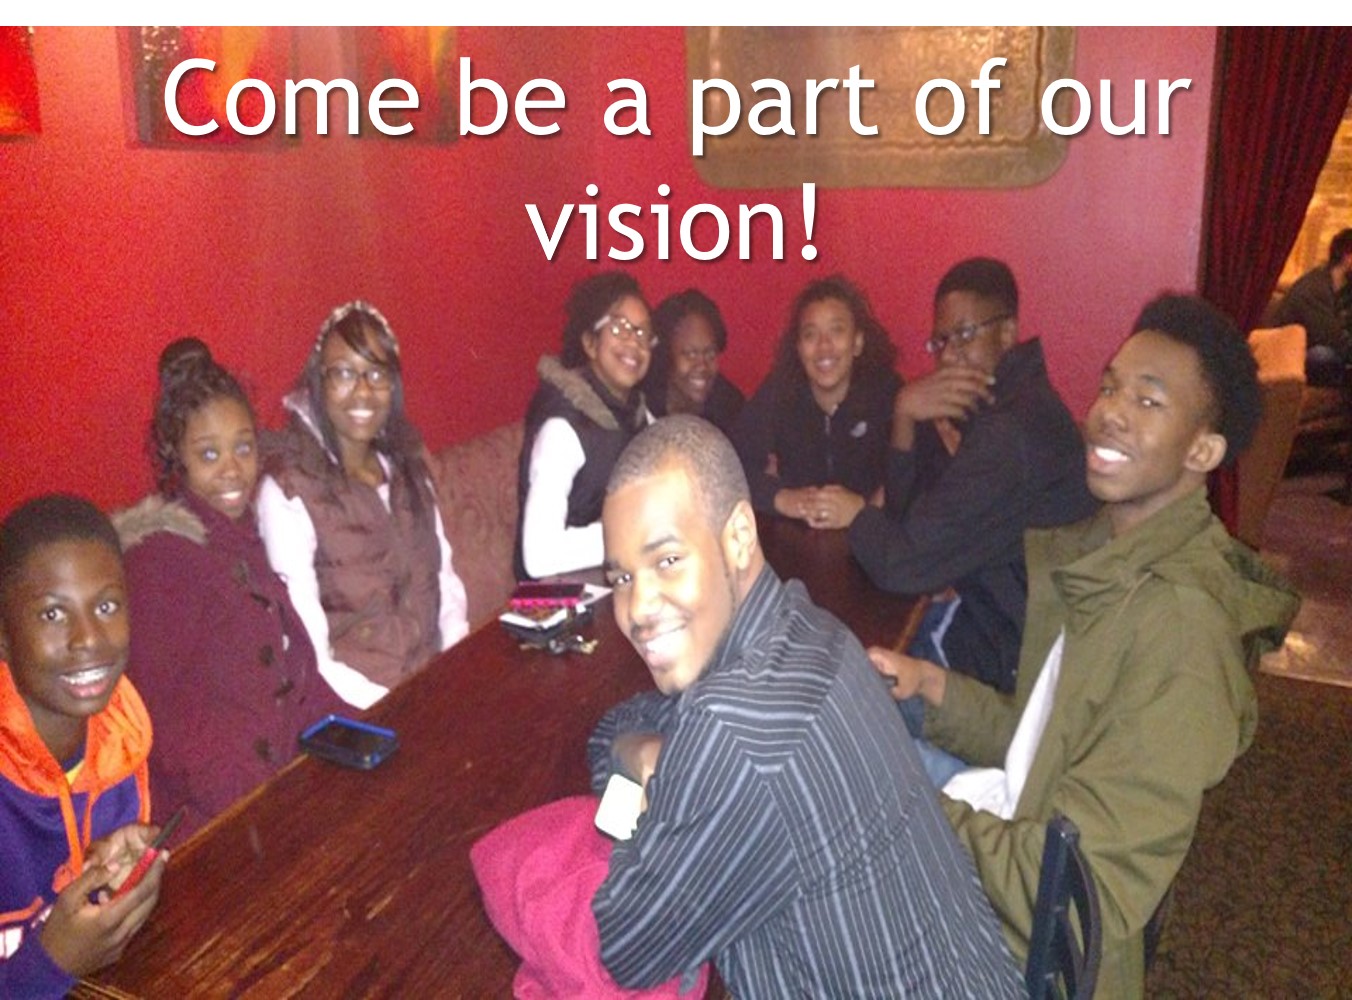 Join our vision